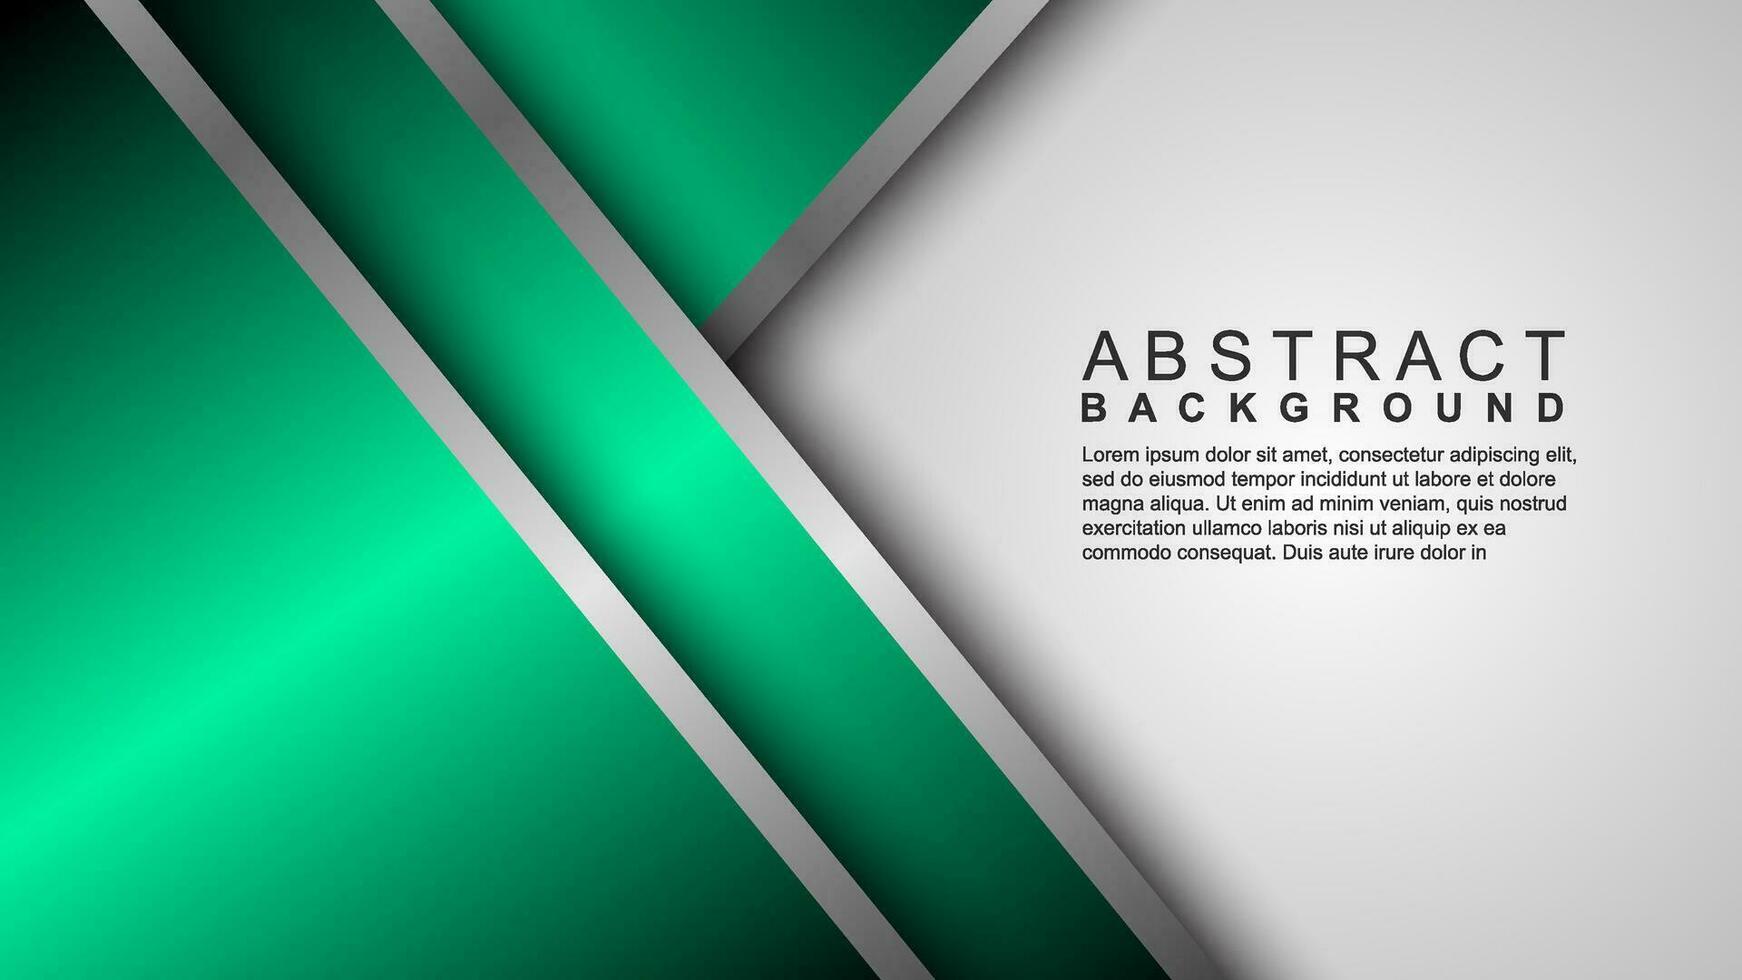 Abstract green overlapping layers background combined with silver textured lines decoration. Luxury and premium concept vector design template for using modern cover elements, banners, cards